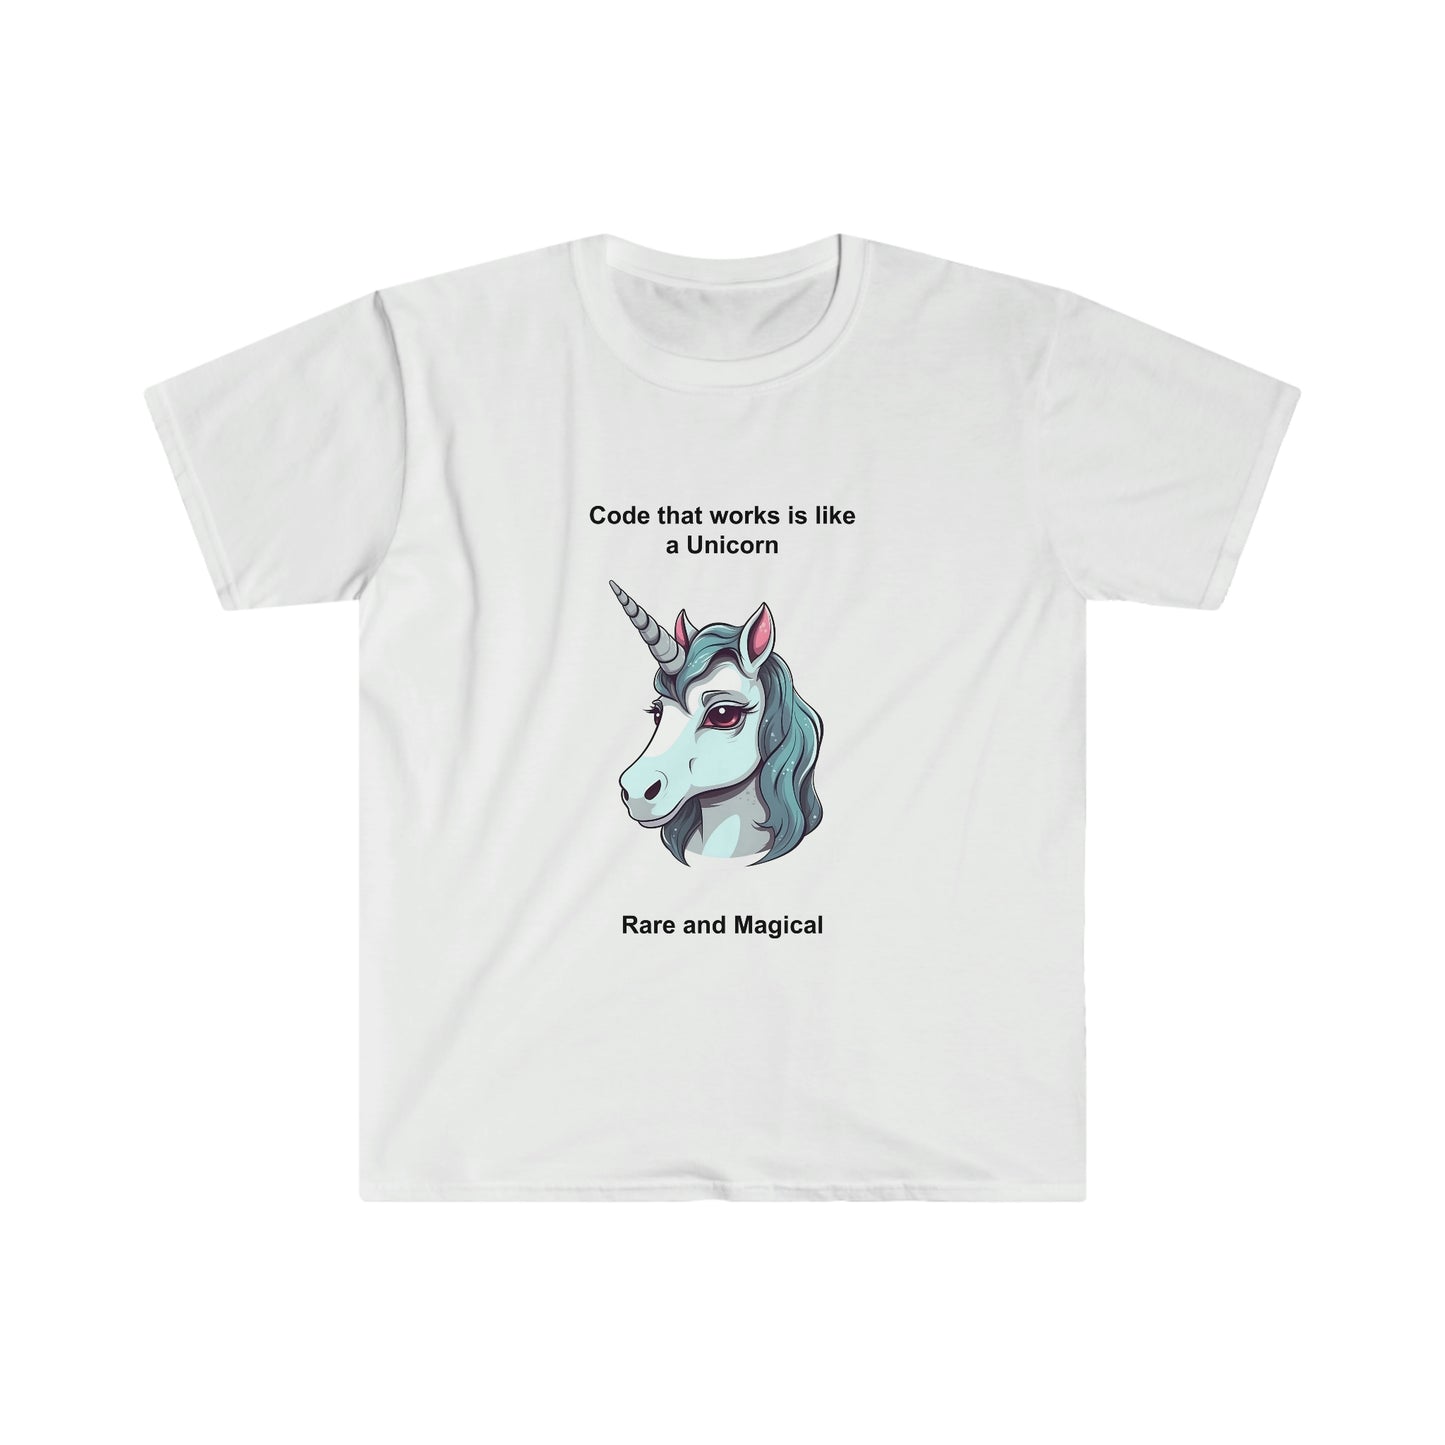 Programmer T-Shirt with Inspiring Quote "Code that works is like a Unicorn: Rare and Magical" to Boost Motivation and Creativity